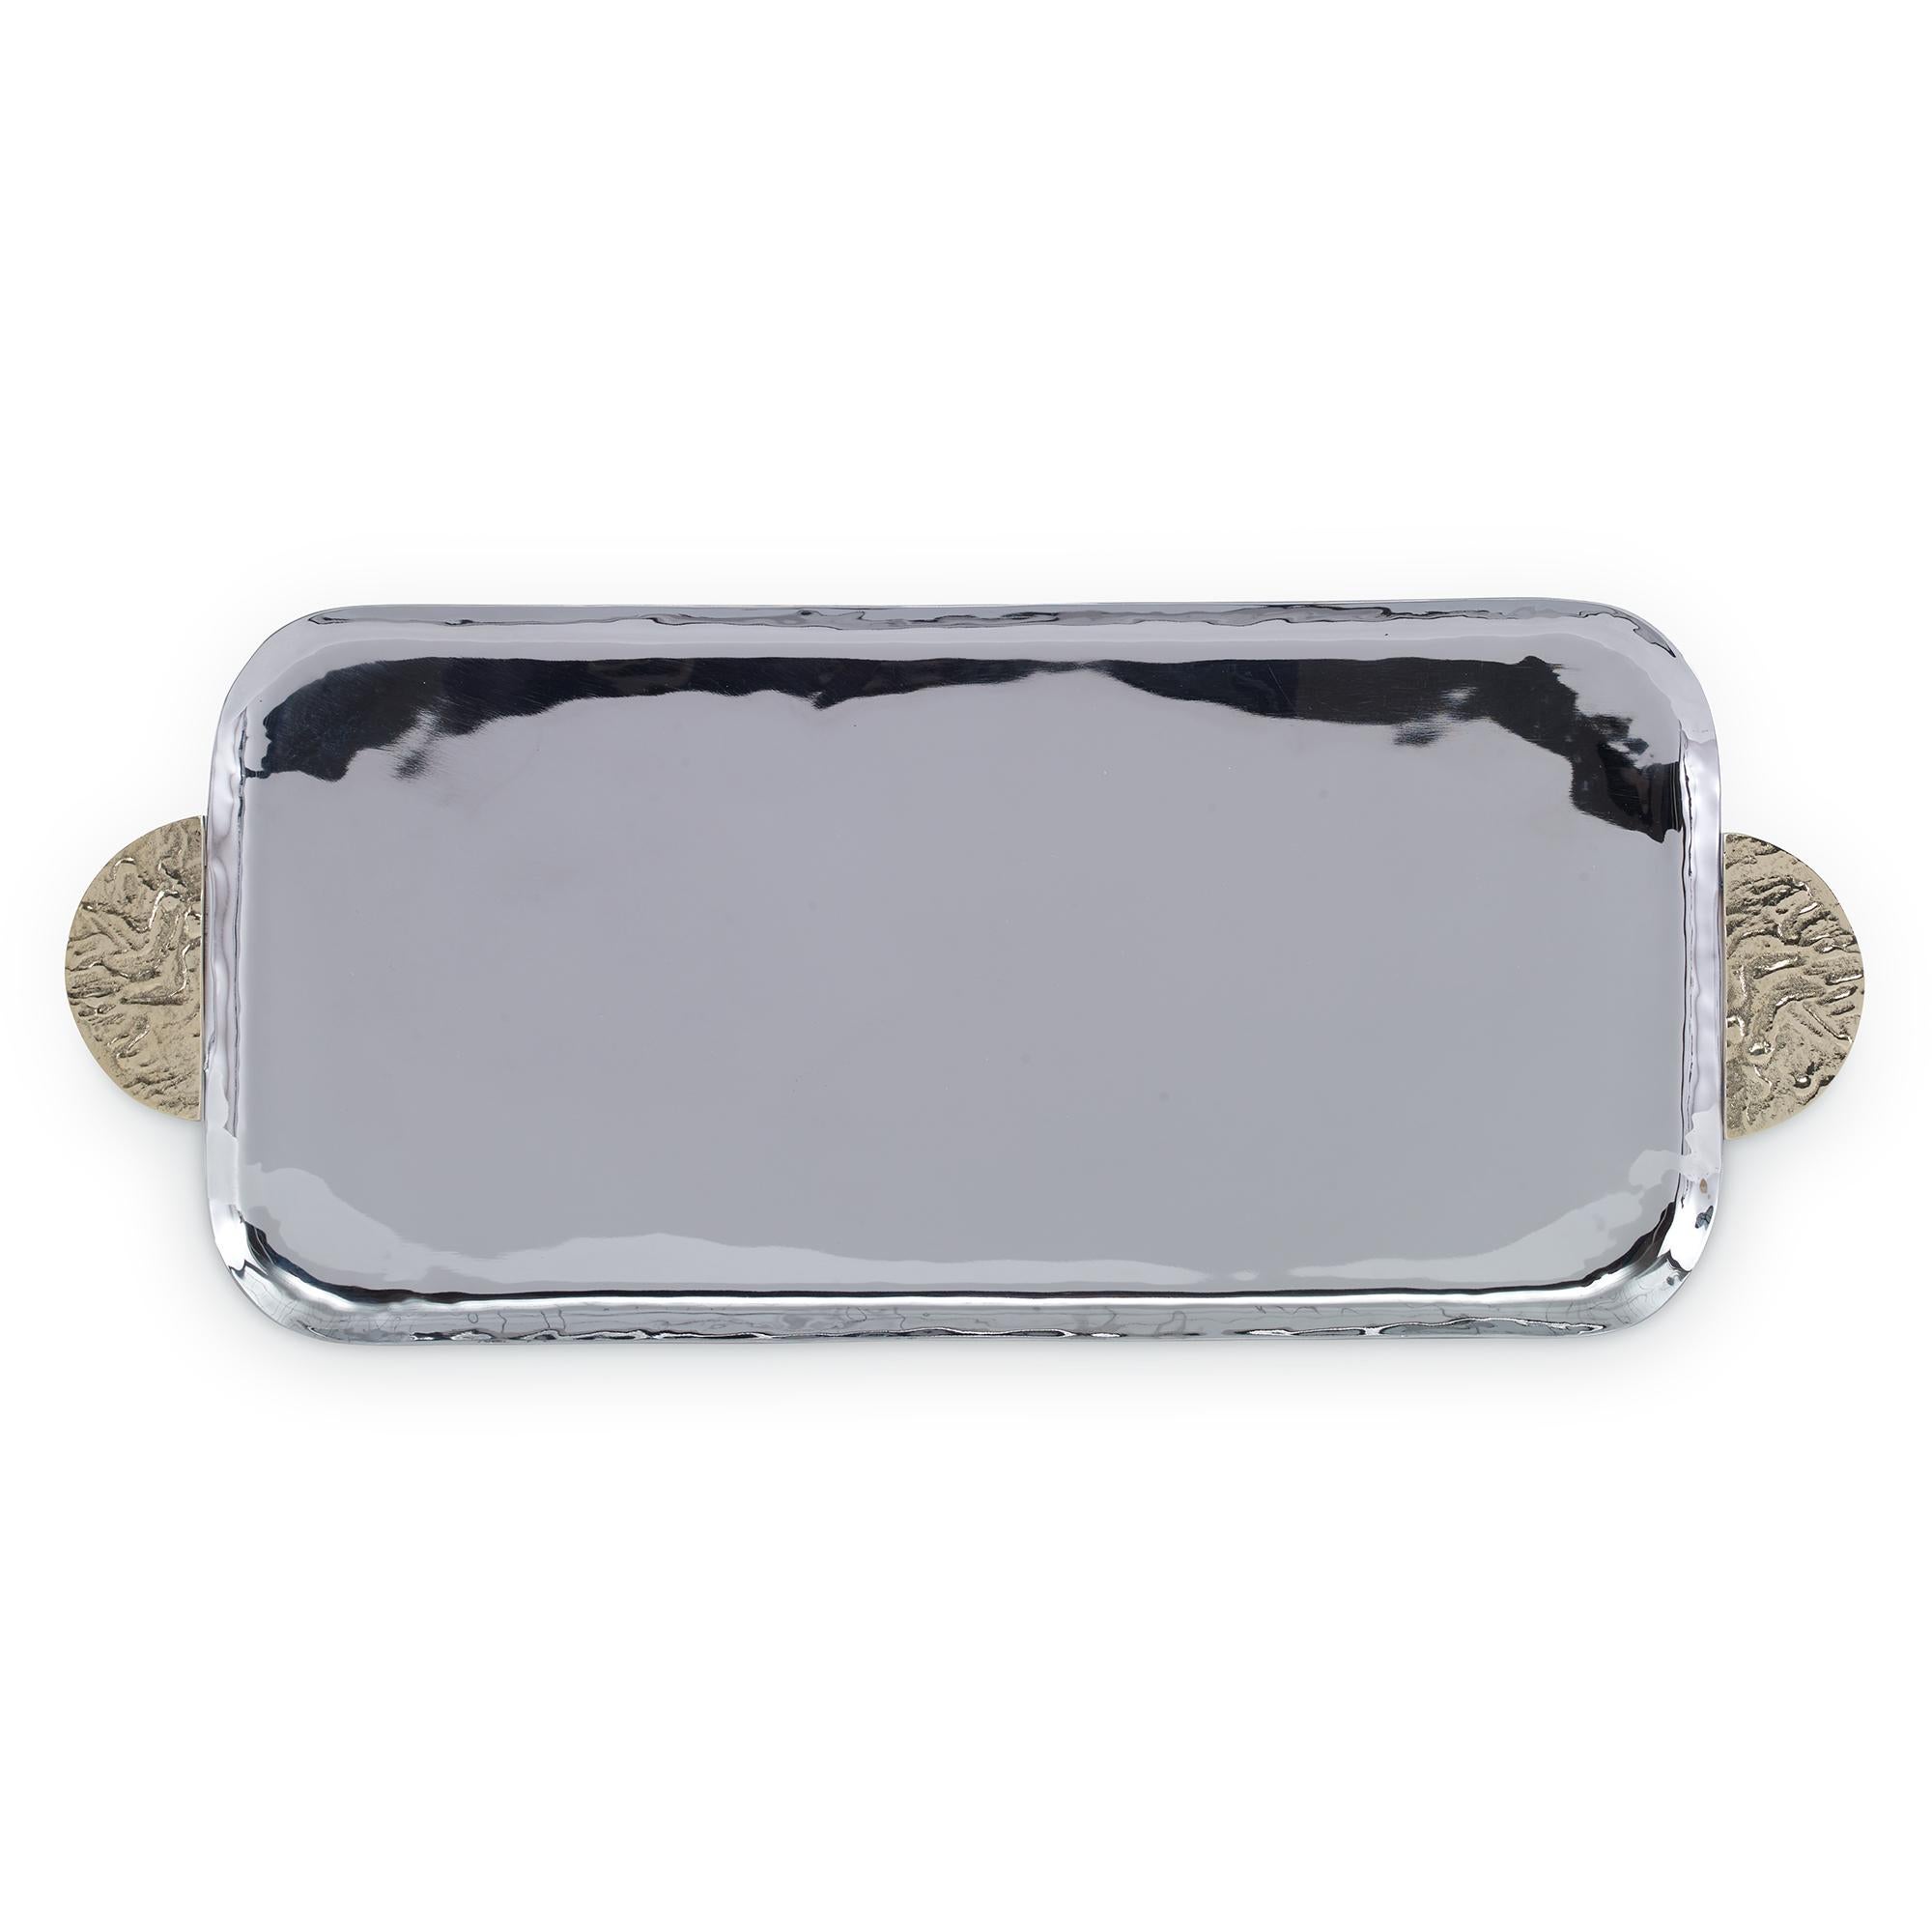 A brass and stainless steel tray with handles, detailed with a combination of matte and shiny finishes.
 